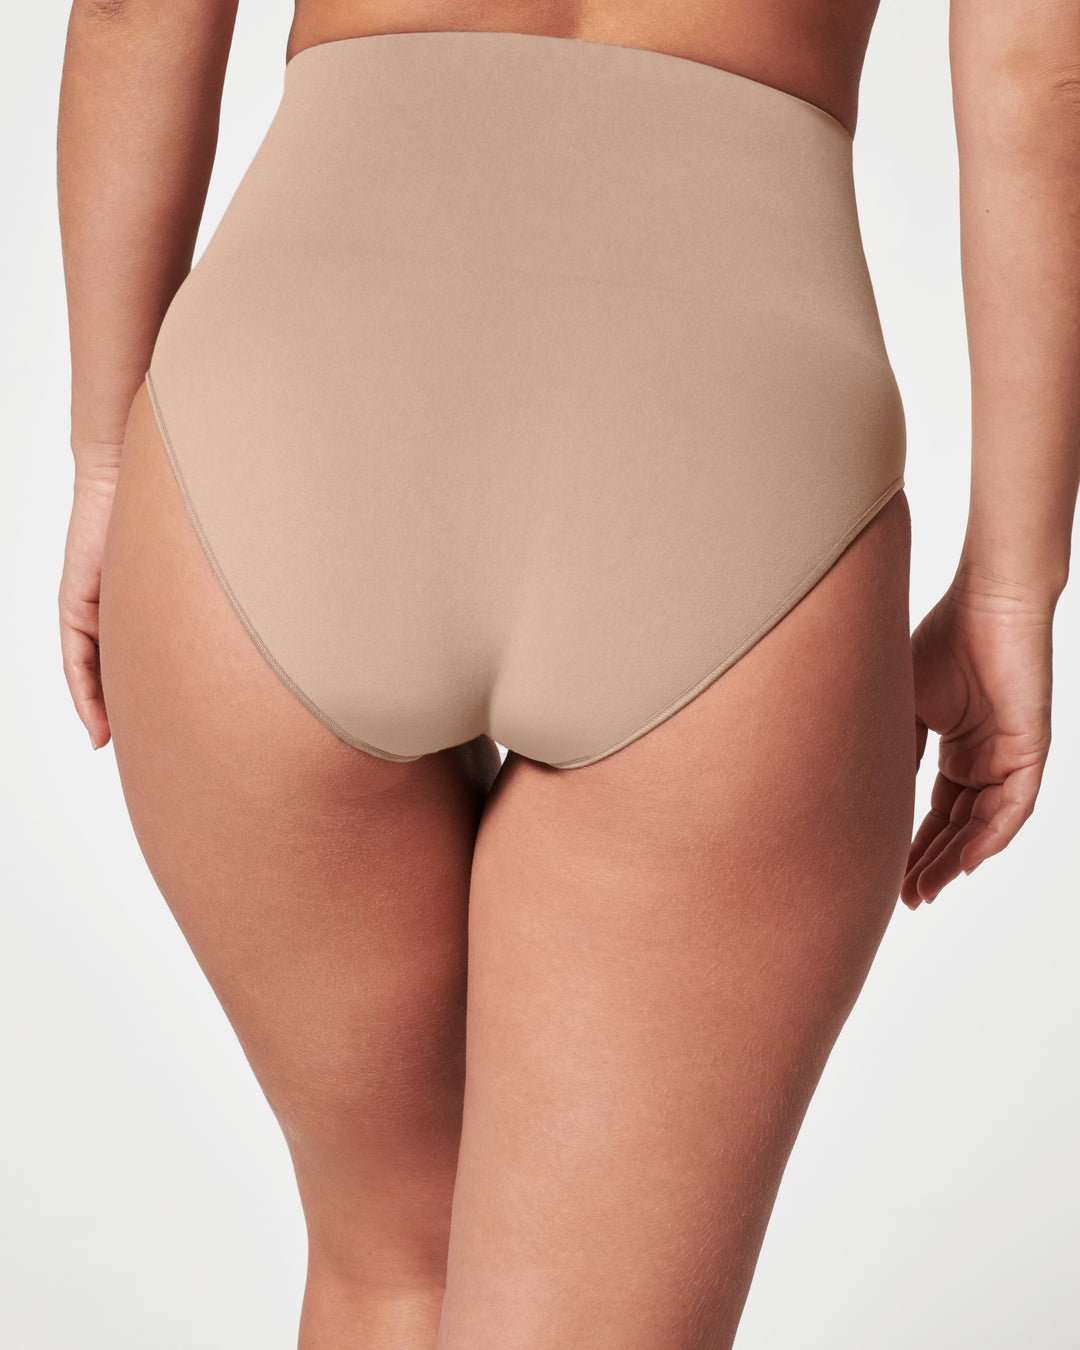 Ecocare Seamless Shaping Brief | Spanx